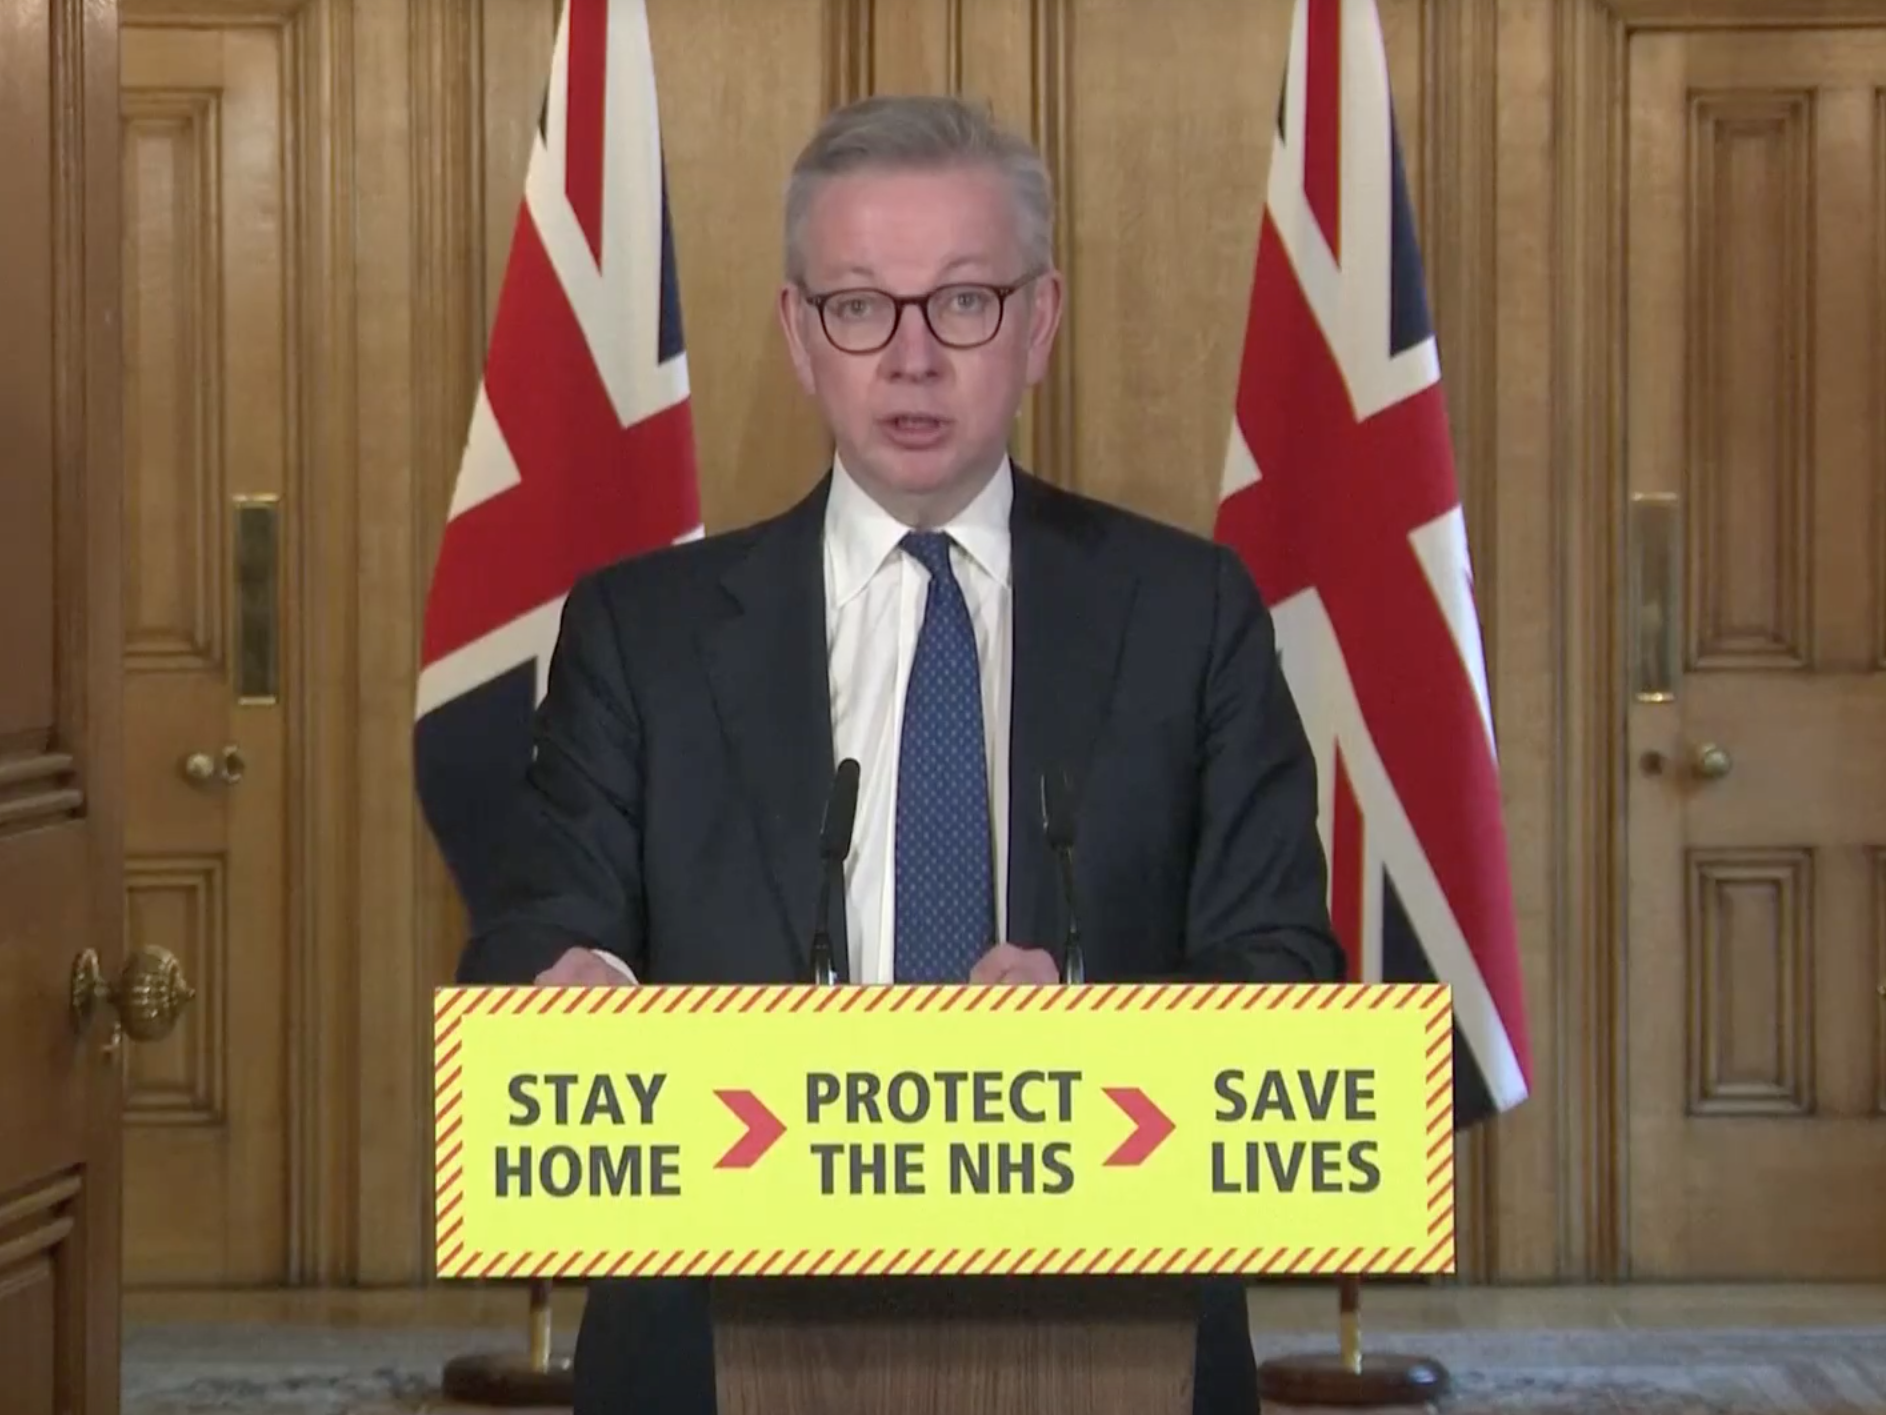 Questions to ministers such as Gove during daily briefings do not plug the gap